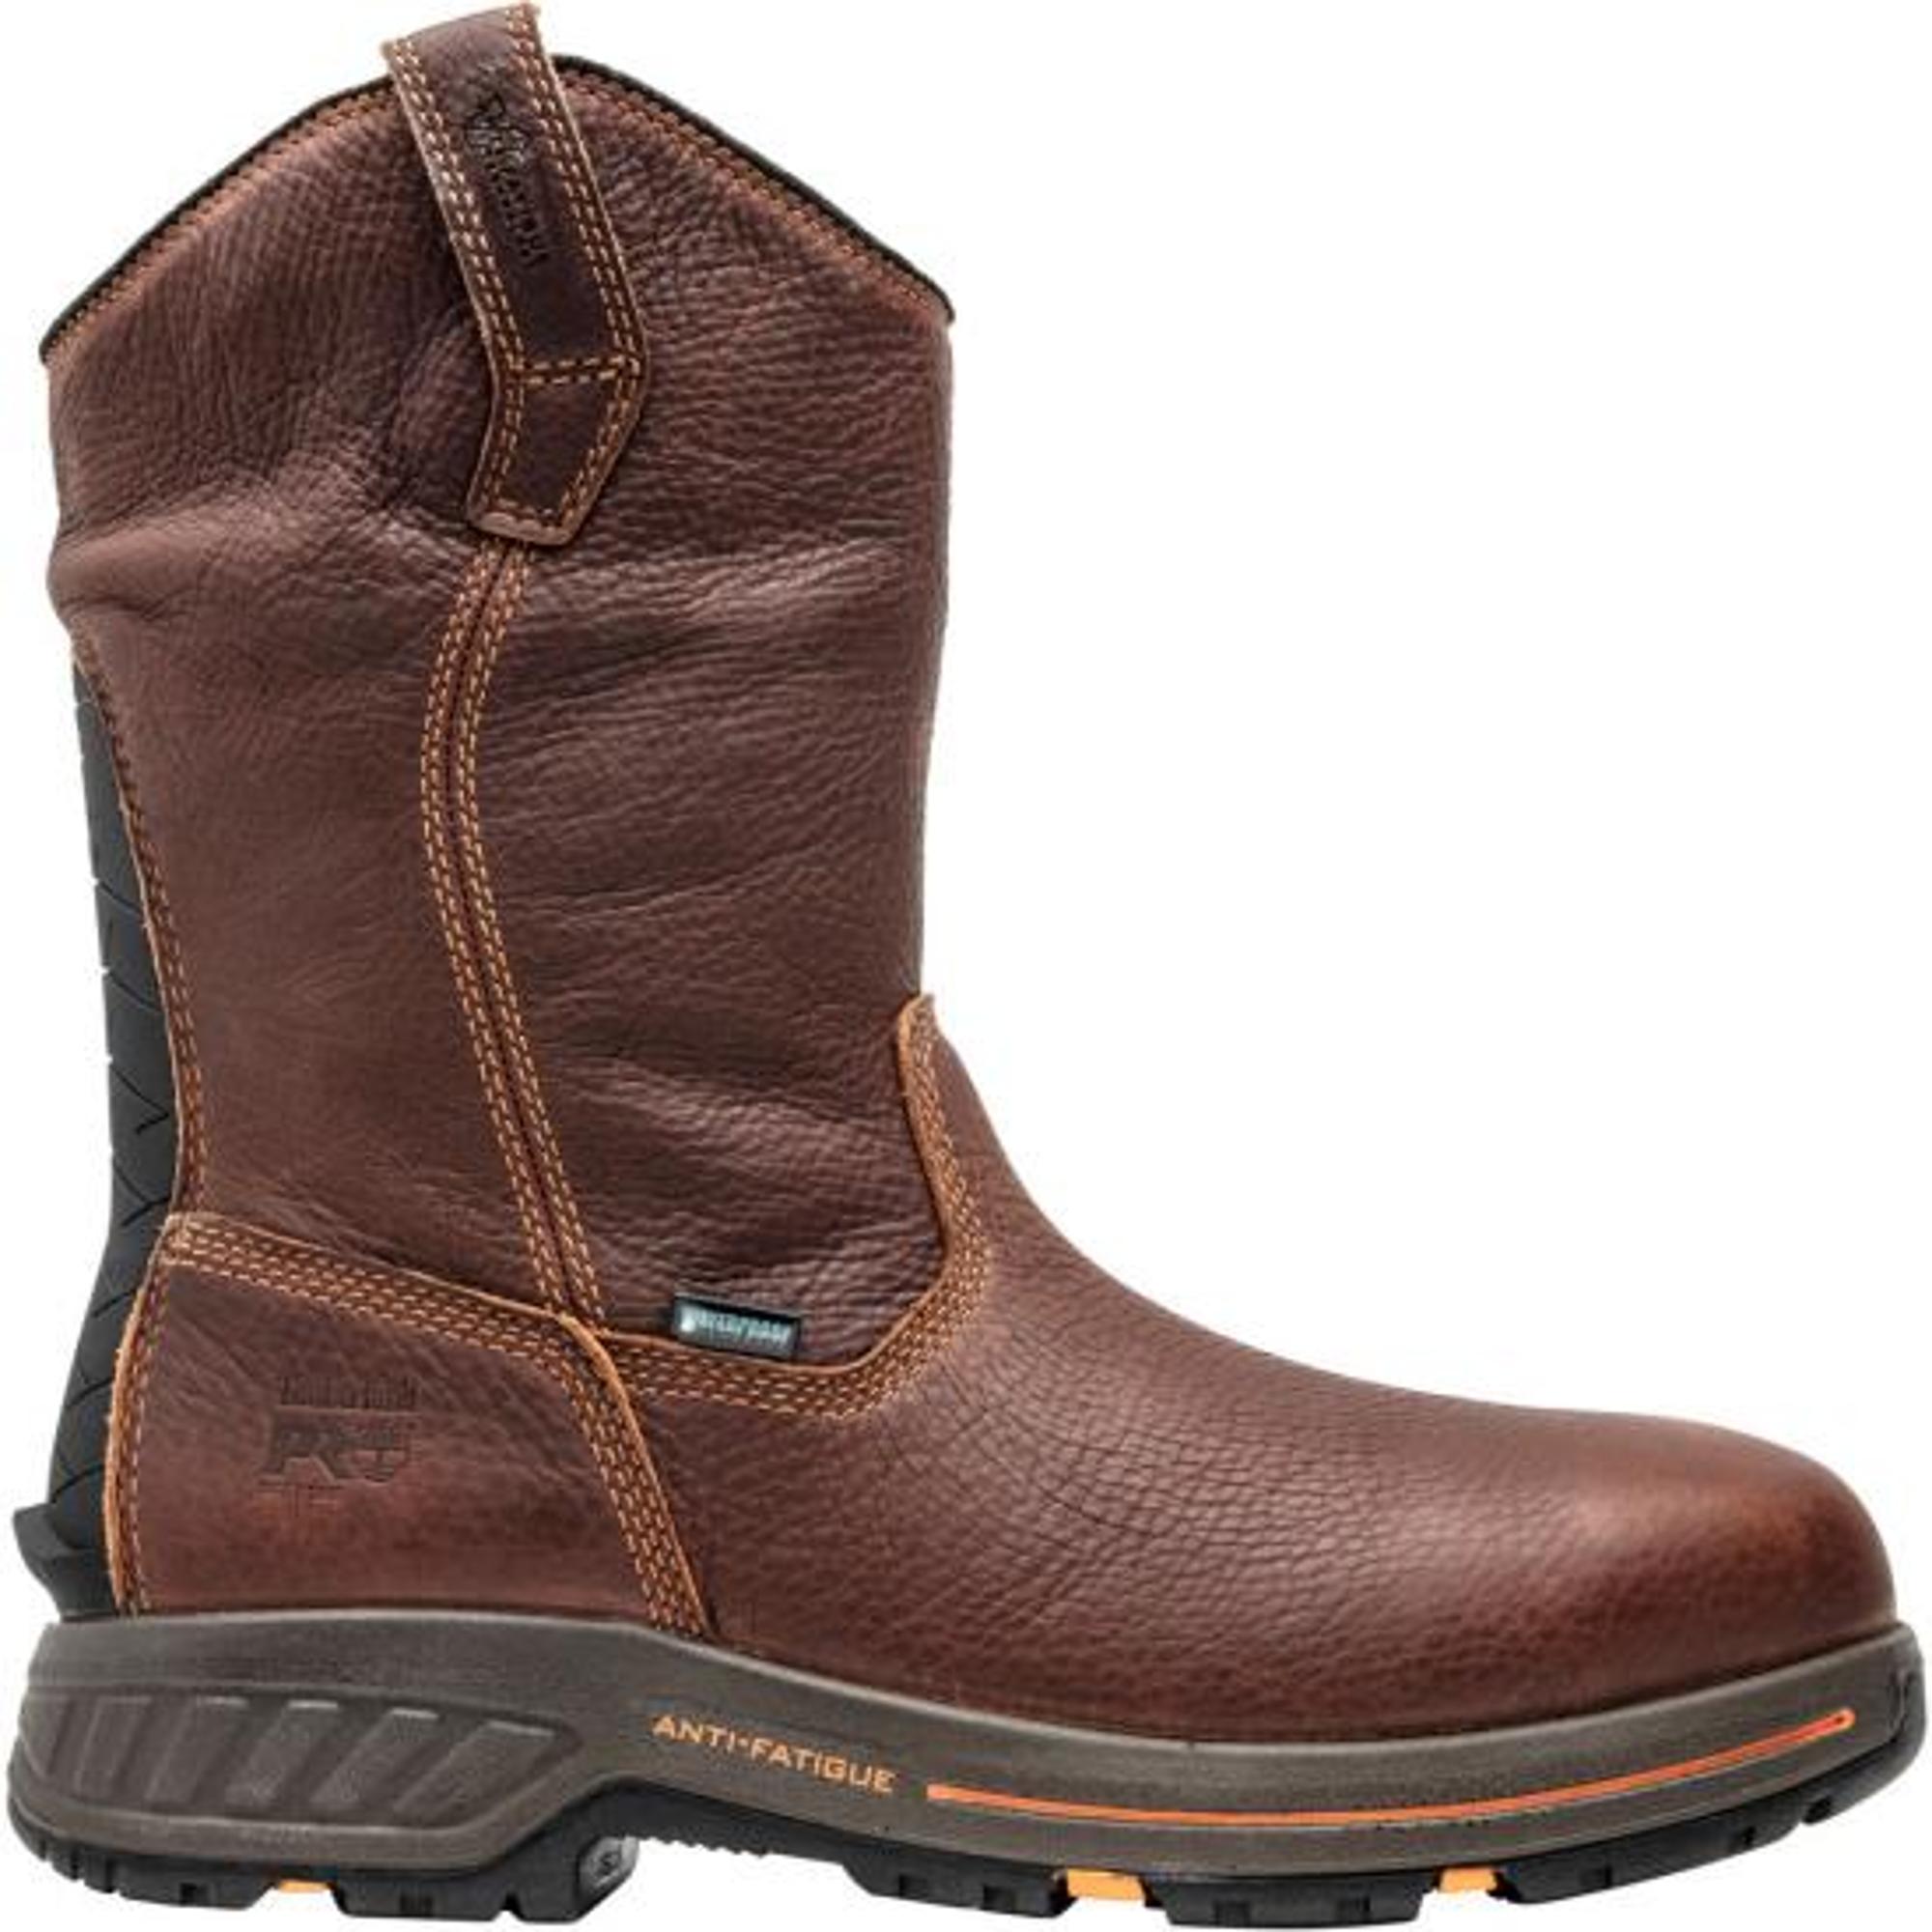 Timberland Helix Hd Soft Toe Pull On Work Boots